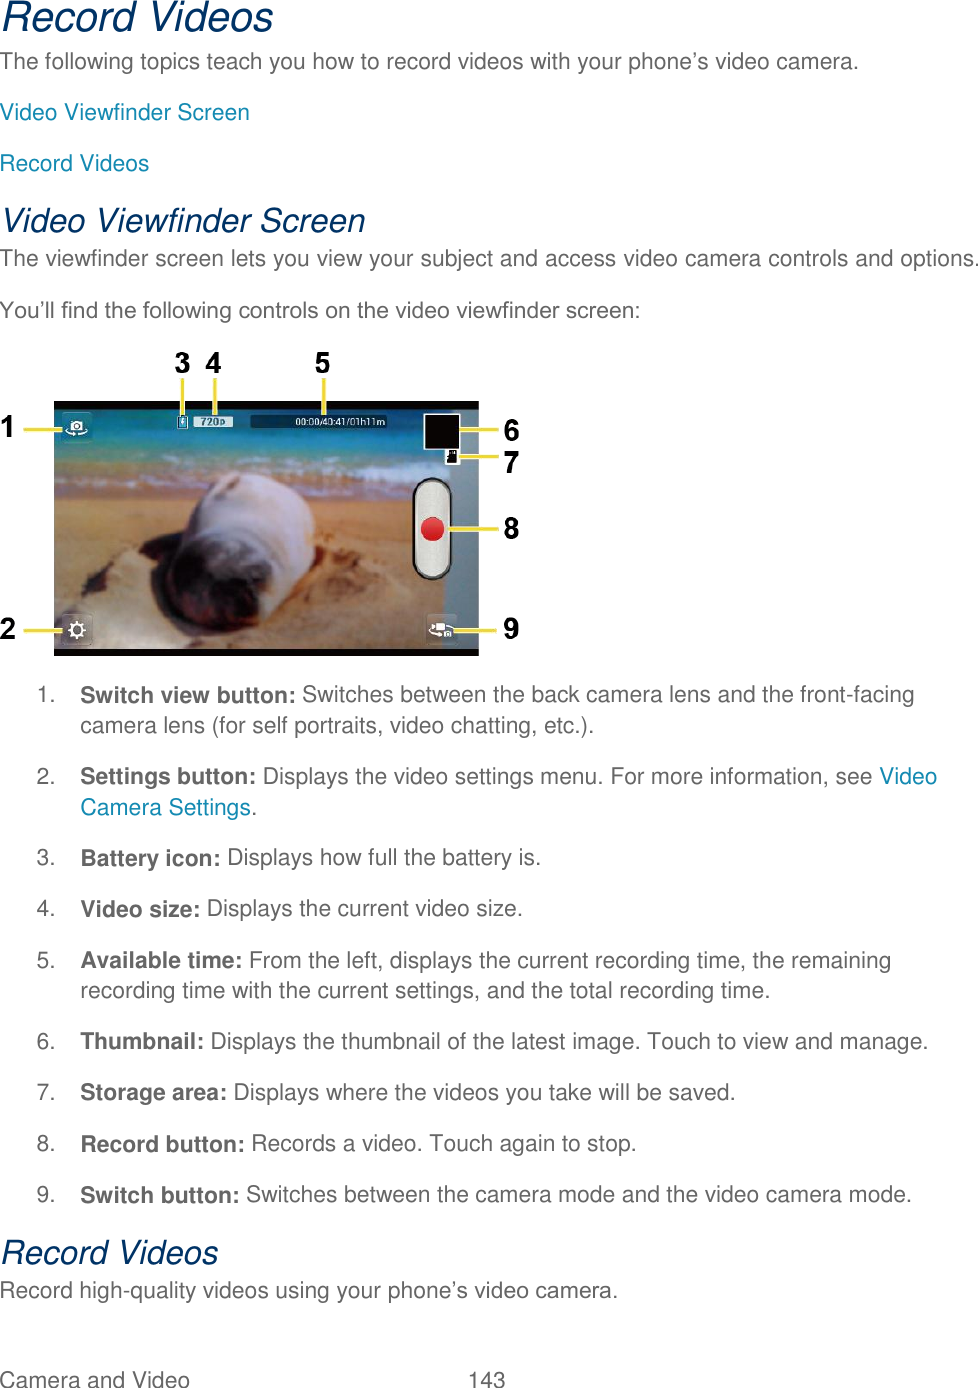 Camera and Video  143   Record Videos The following topics teach you how to record videos with your phone’s video camera. Video Viewfinder Screen Record Videos Video Viewfinder Screen The viewfinder screen lets you view your subject and access video camera controls and options. You’ll find the following controls on the video viewfinder screen:  1. Switch view button: Switches between the back camera lens and the front-facing camera lens (for self portraits, video chatting, etc.). 2. Settings button: Displays the video settings menu. For more information, see Video Camera Settings. 3. Battery icon: Displays how full the battery is. 4. Video size: Displays the current video size. 5. Available time: From the left, displays the current recording time, the remaining recording time with the current settings, and the total recording time. 6. Thumbnail: Displays the thumbnail of the latest image. Touch to view and manage. 7. Storage area: Displays where the videos you take will be saved. 8. Record button: Records a video. Touch again to stop. 9. Switch button: Switches between the camera mode and the video camera mode. Record Videos Record high-quality videos using your phone’s video camera. 